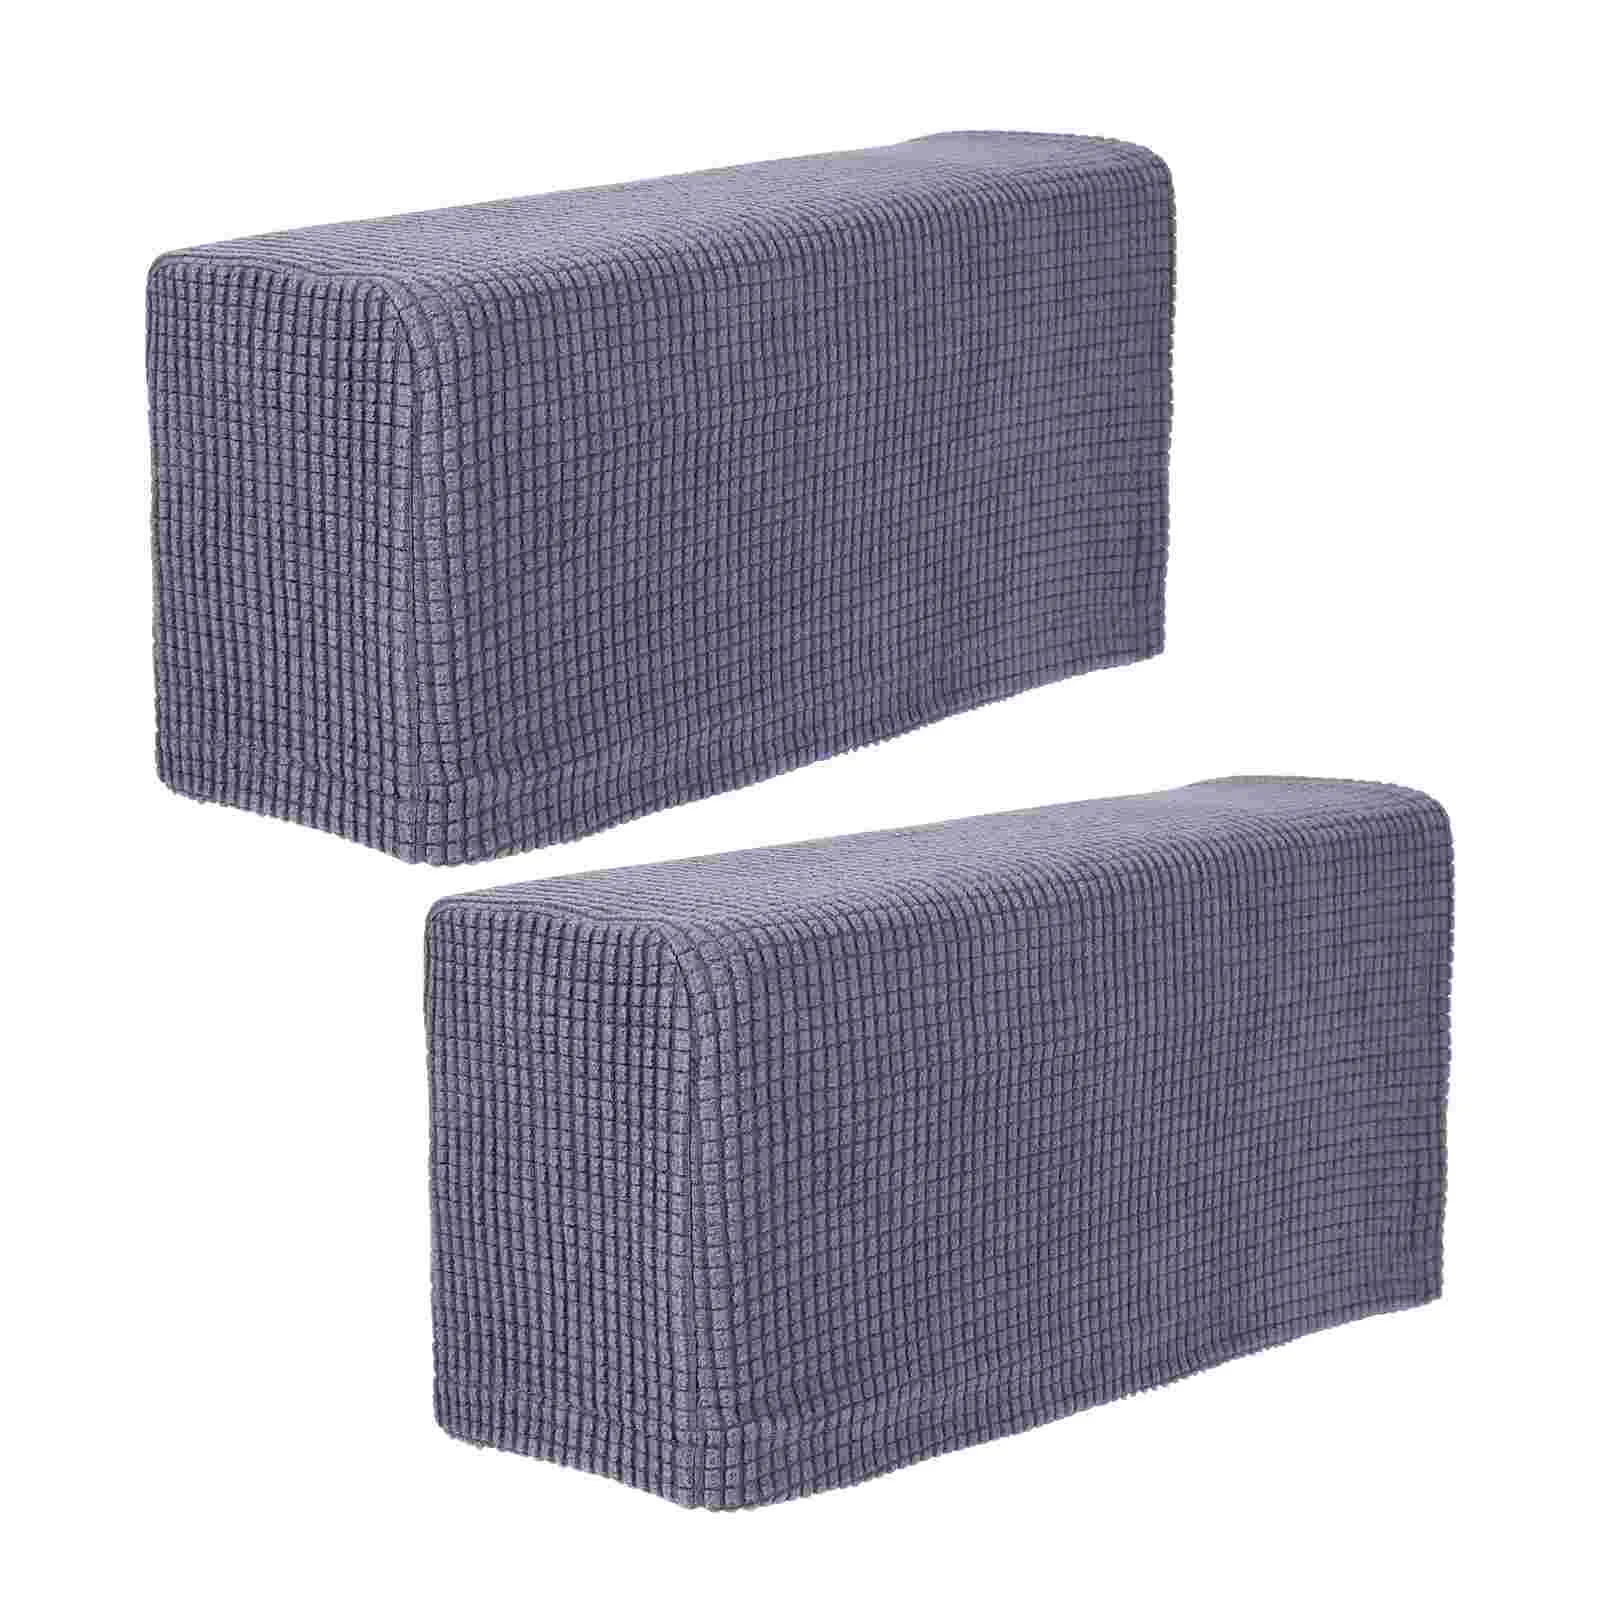 

Covers Armrest Arm Sofa Cover Chair Stretch Couch Protectors Chairs Recliner Protector Armchair Slipcovers Furniture Recliners